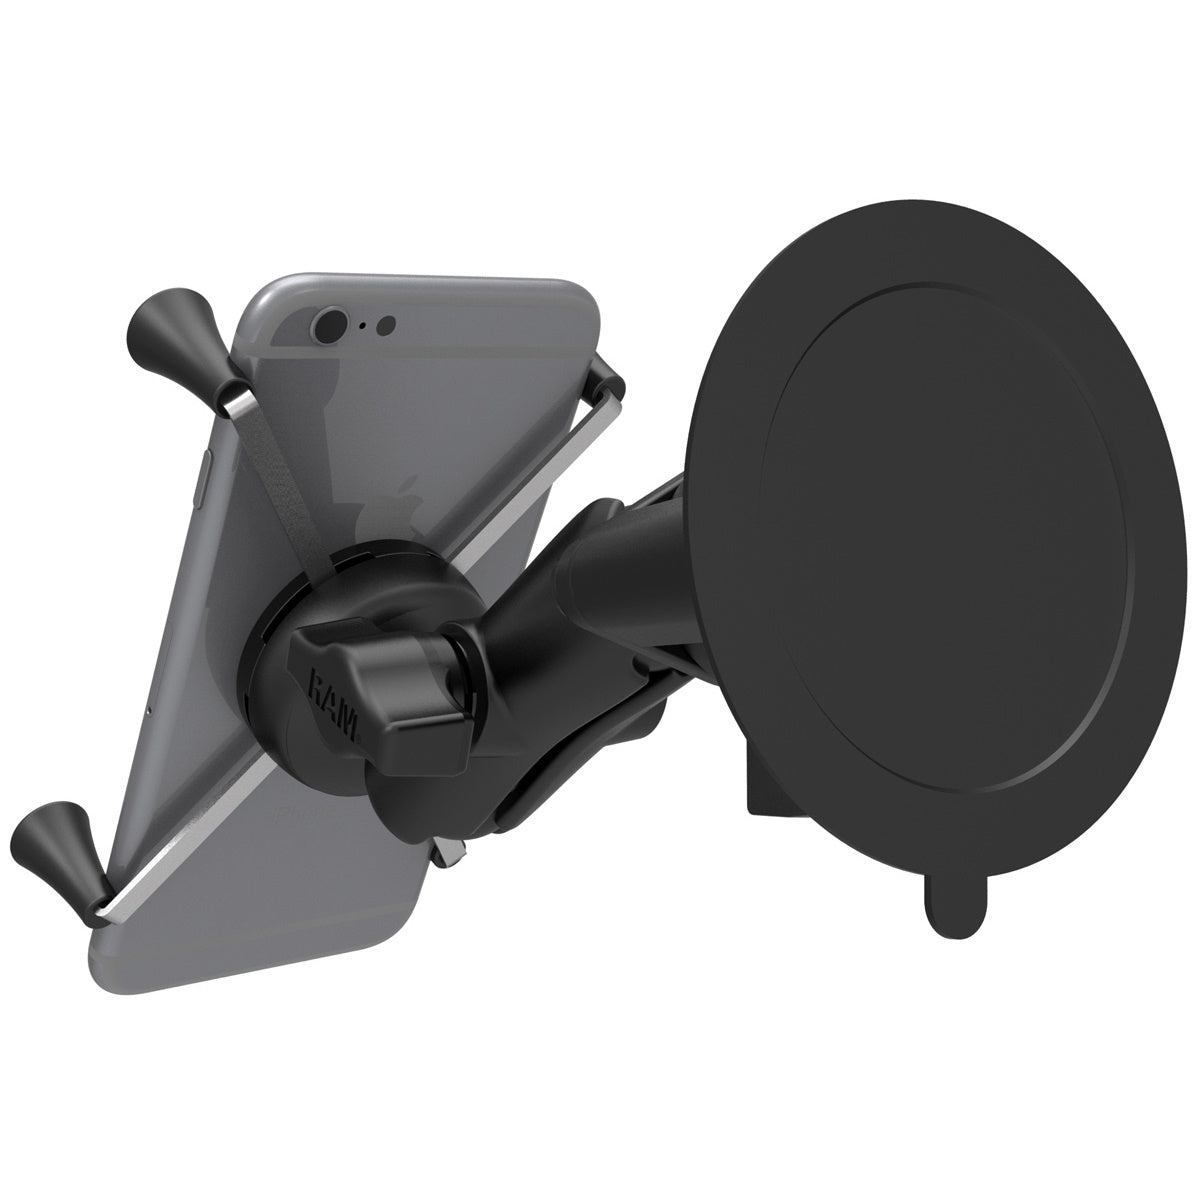 RAM Mounts Twist-Lock Suction Cup Mount with Universal X-Grip Large Phone/Phablet Cradle